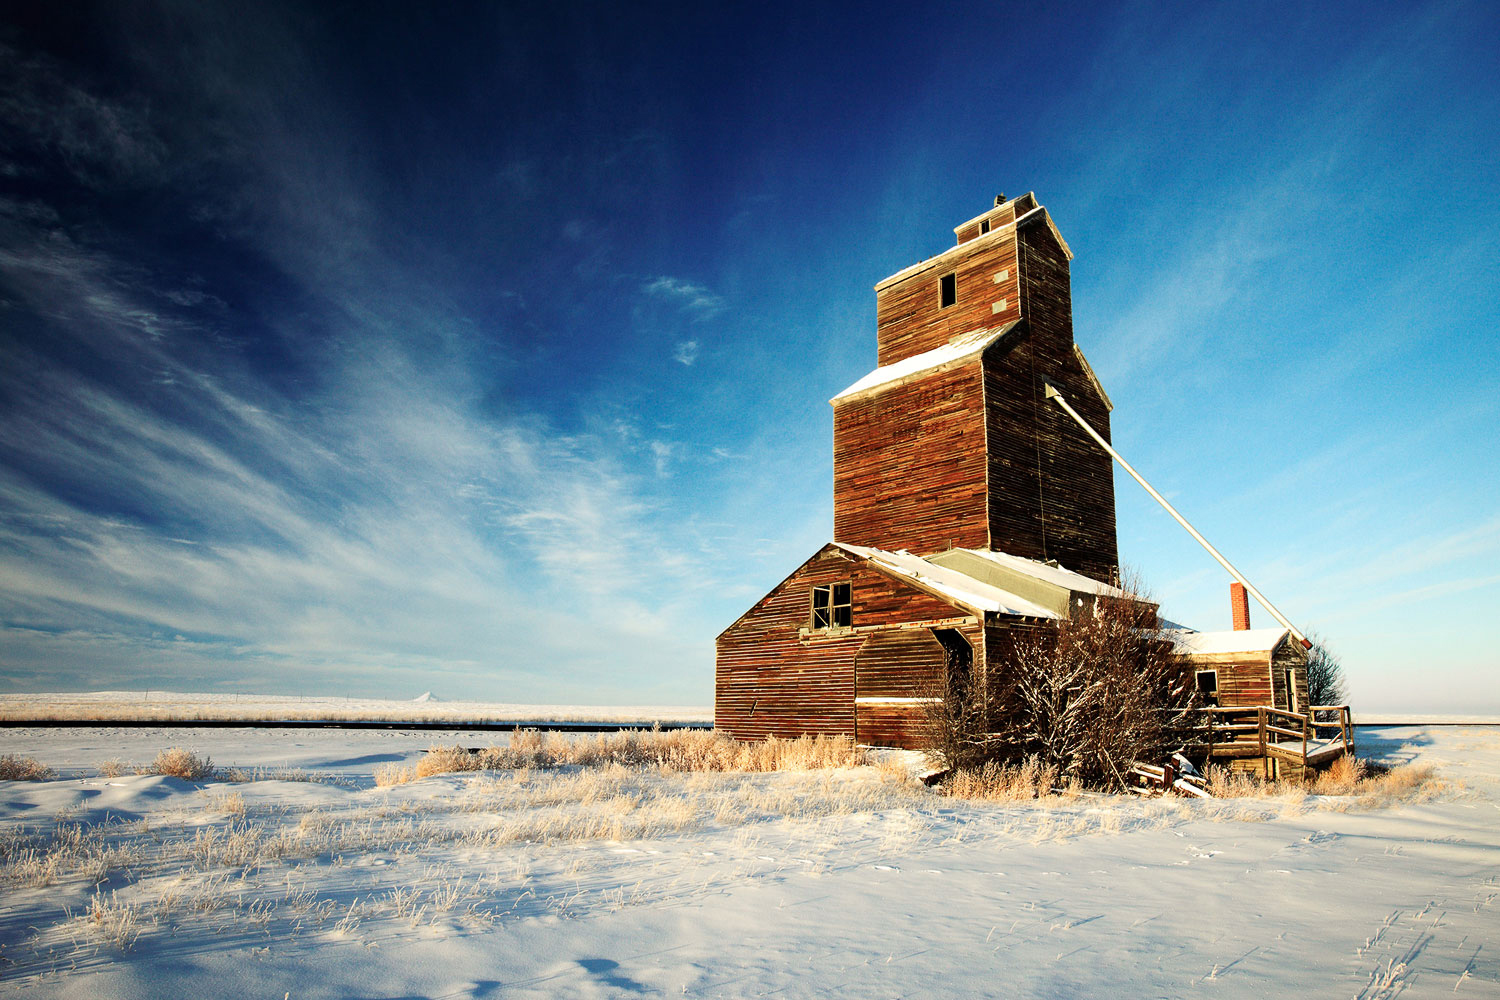 An old, broken down grain elevator sits quietly in the cold western snow.&nbsp;→ Buy a Print